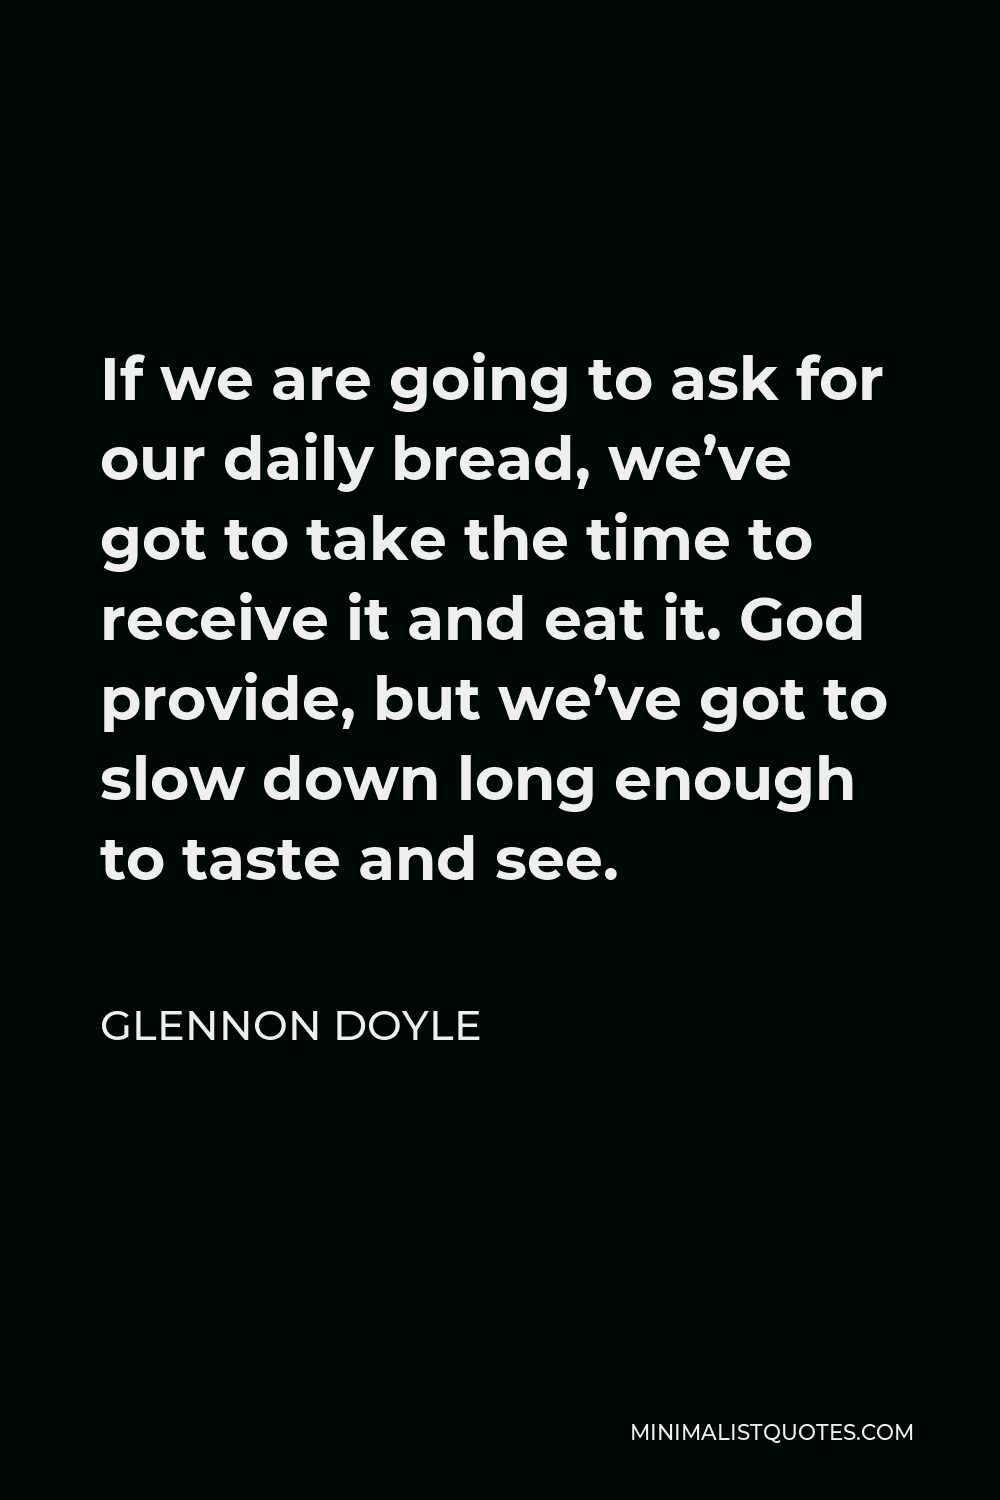 Glennon Doyle Quote - If we are going to ask for our daily bread, we’ve got to take the time to receive it and eat it. God provide, but we’ve got to slow down long enough to taste and see.